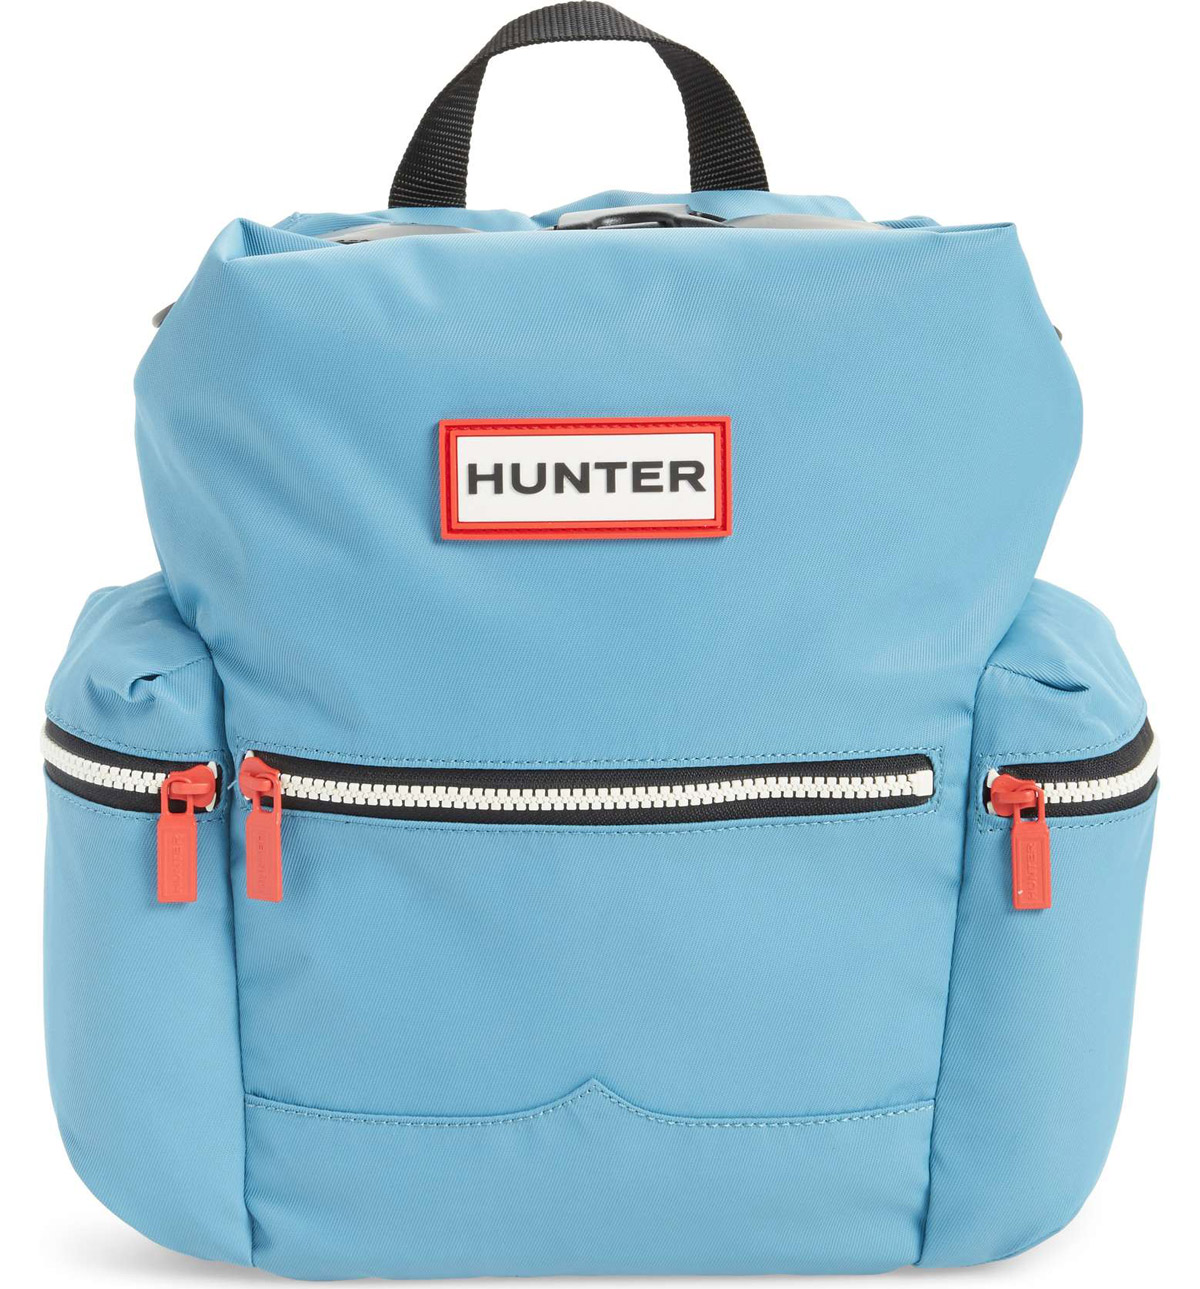 Fitness Gift Idea: Hunter Gym Bag in Baby Blue